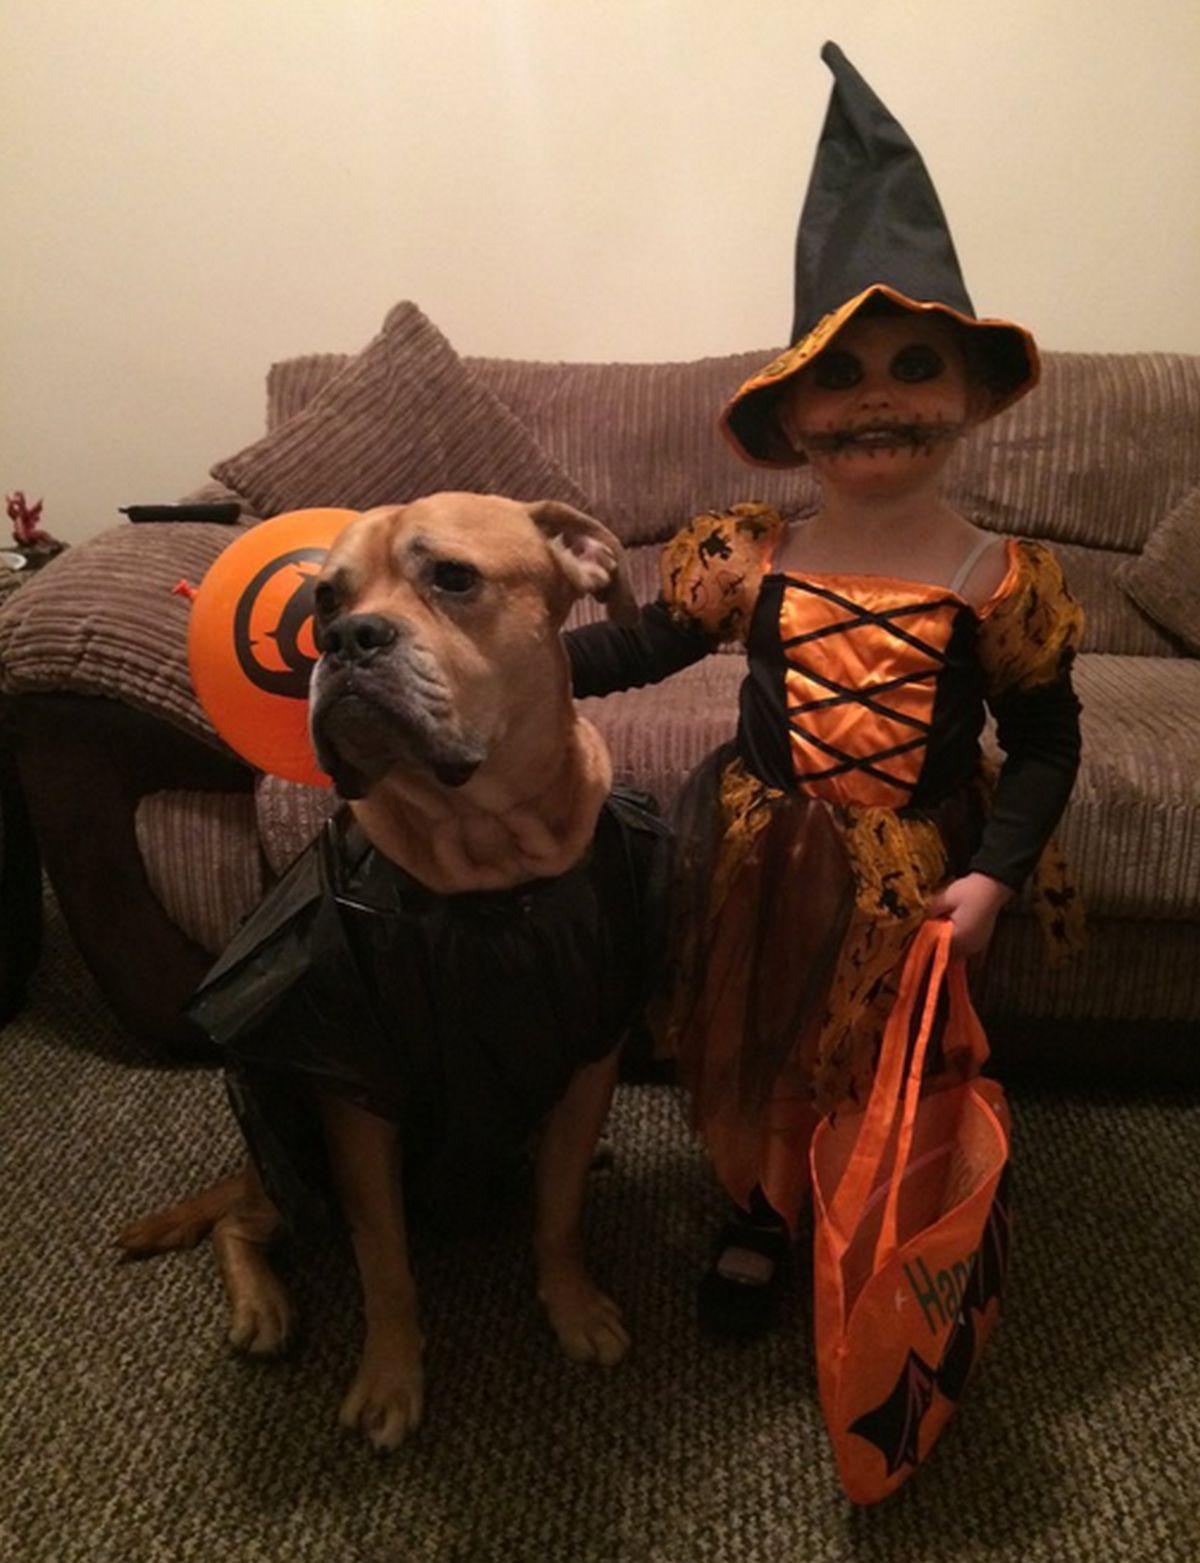 Picture by Emma Cain of her niece and their dog dressed up